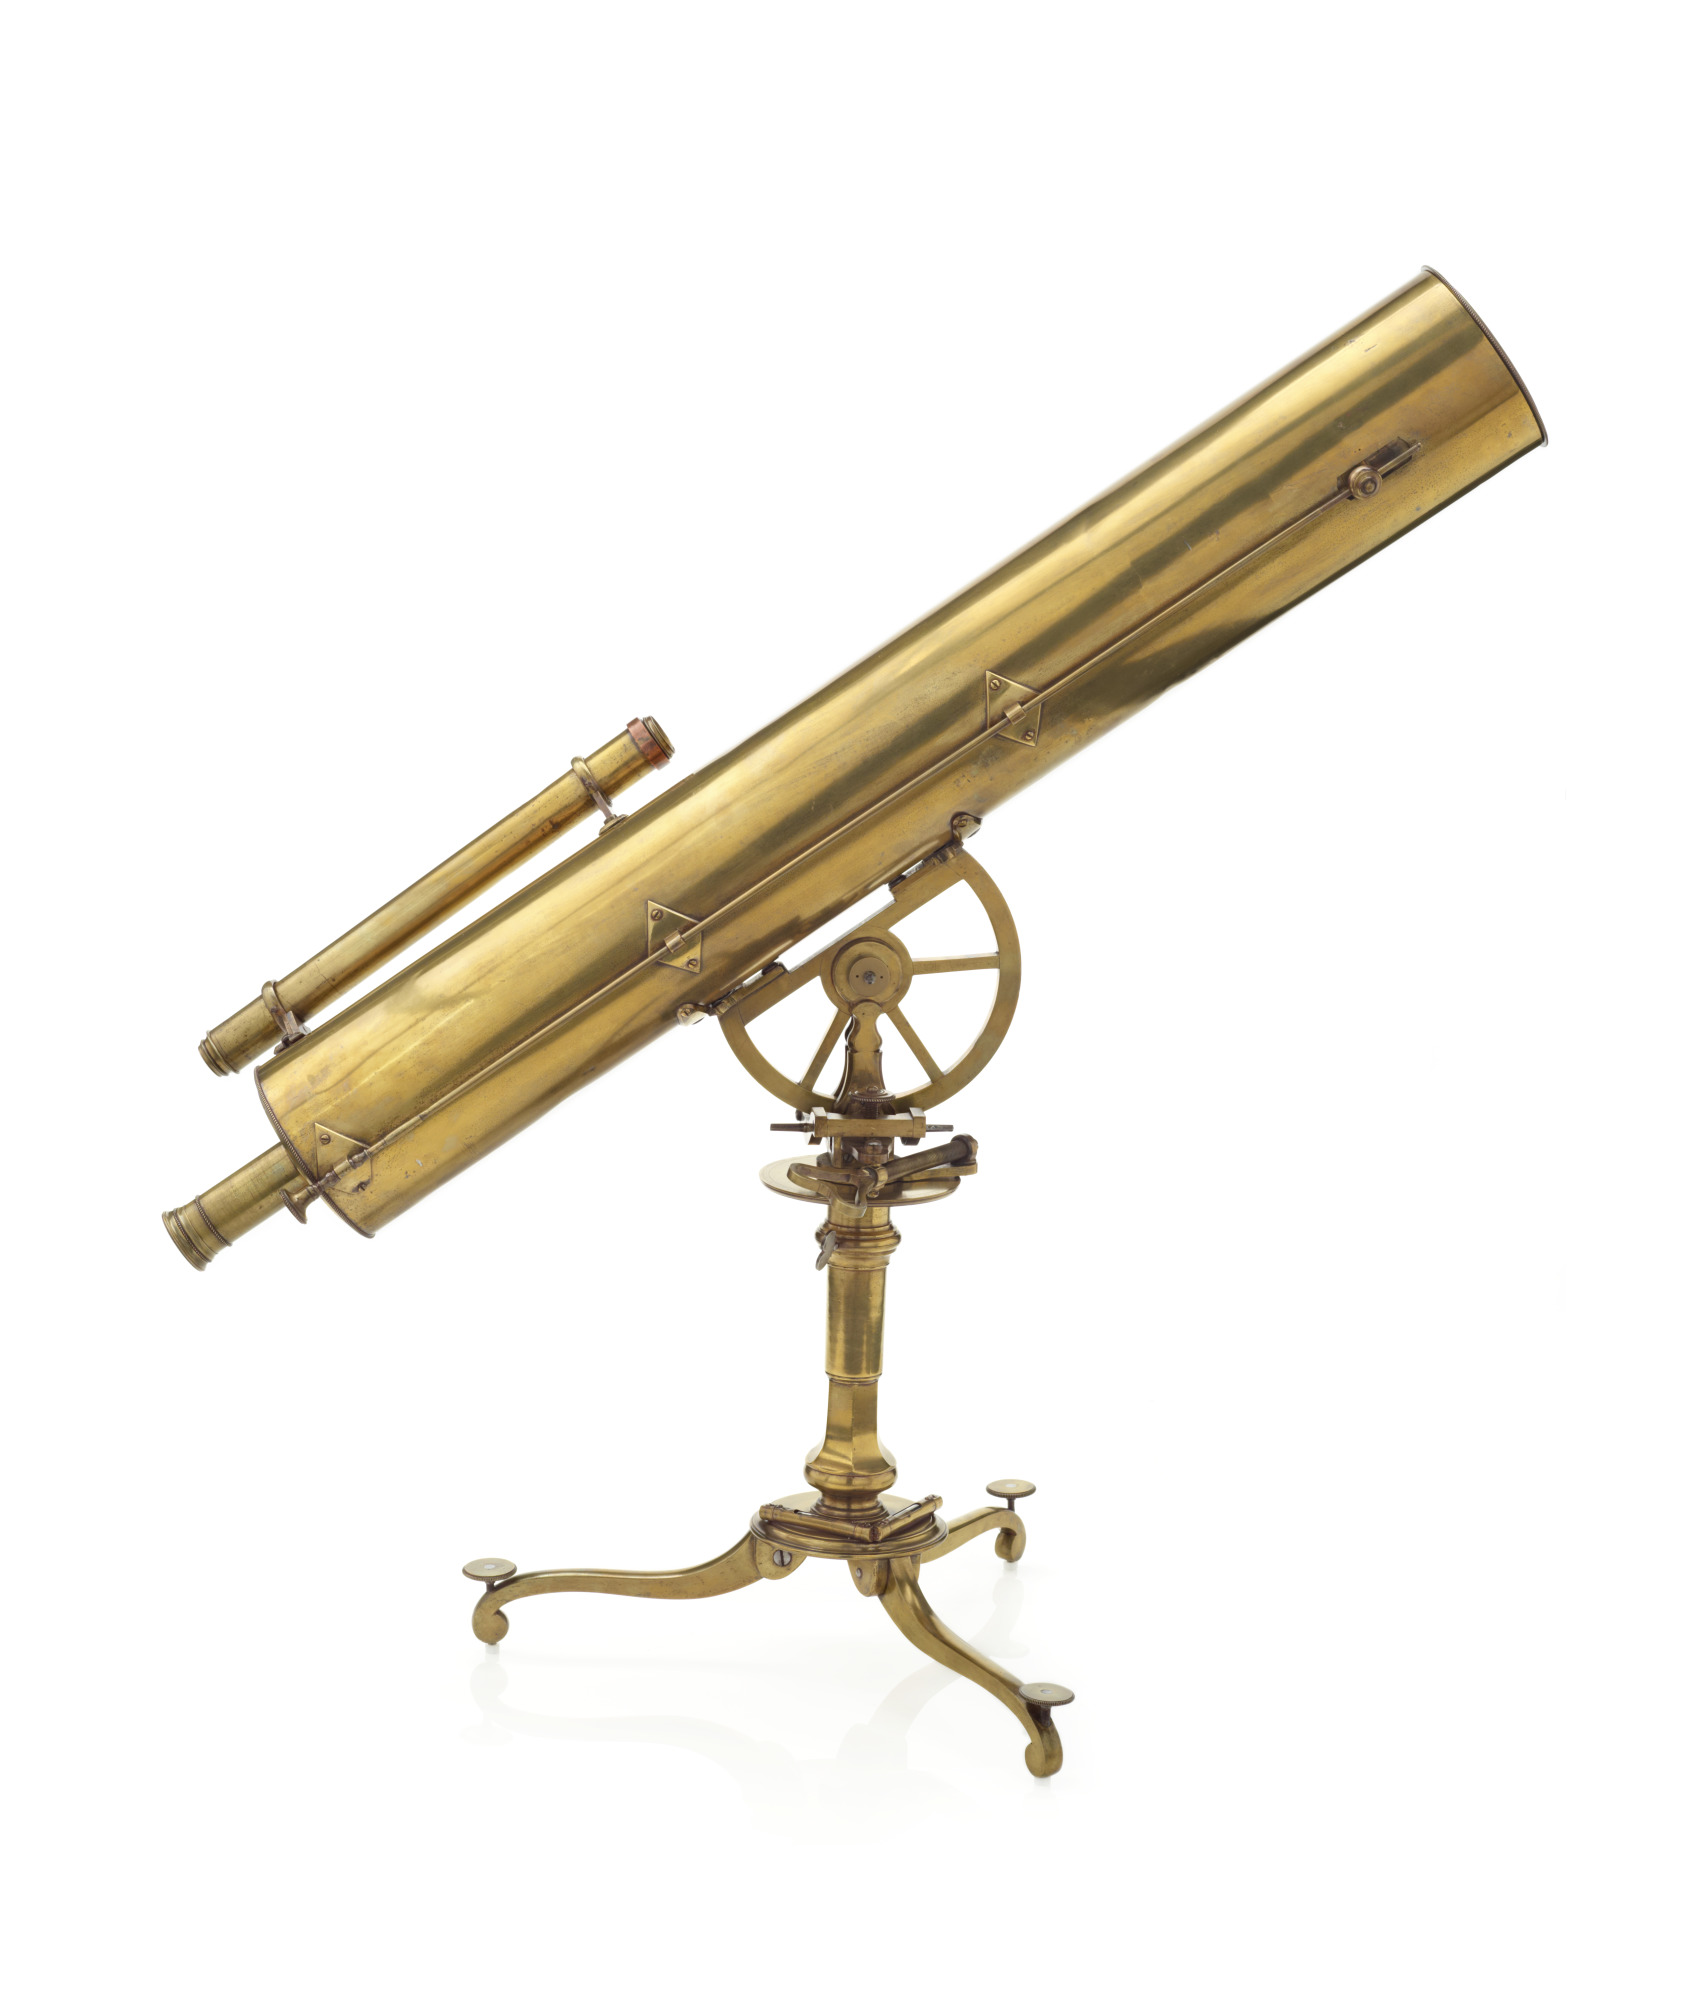 Astronomical telescope (Gregorian reflector type), from about 1765, England, by Heath and Wing, London.